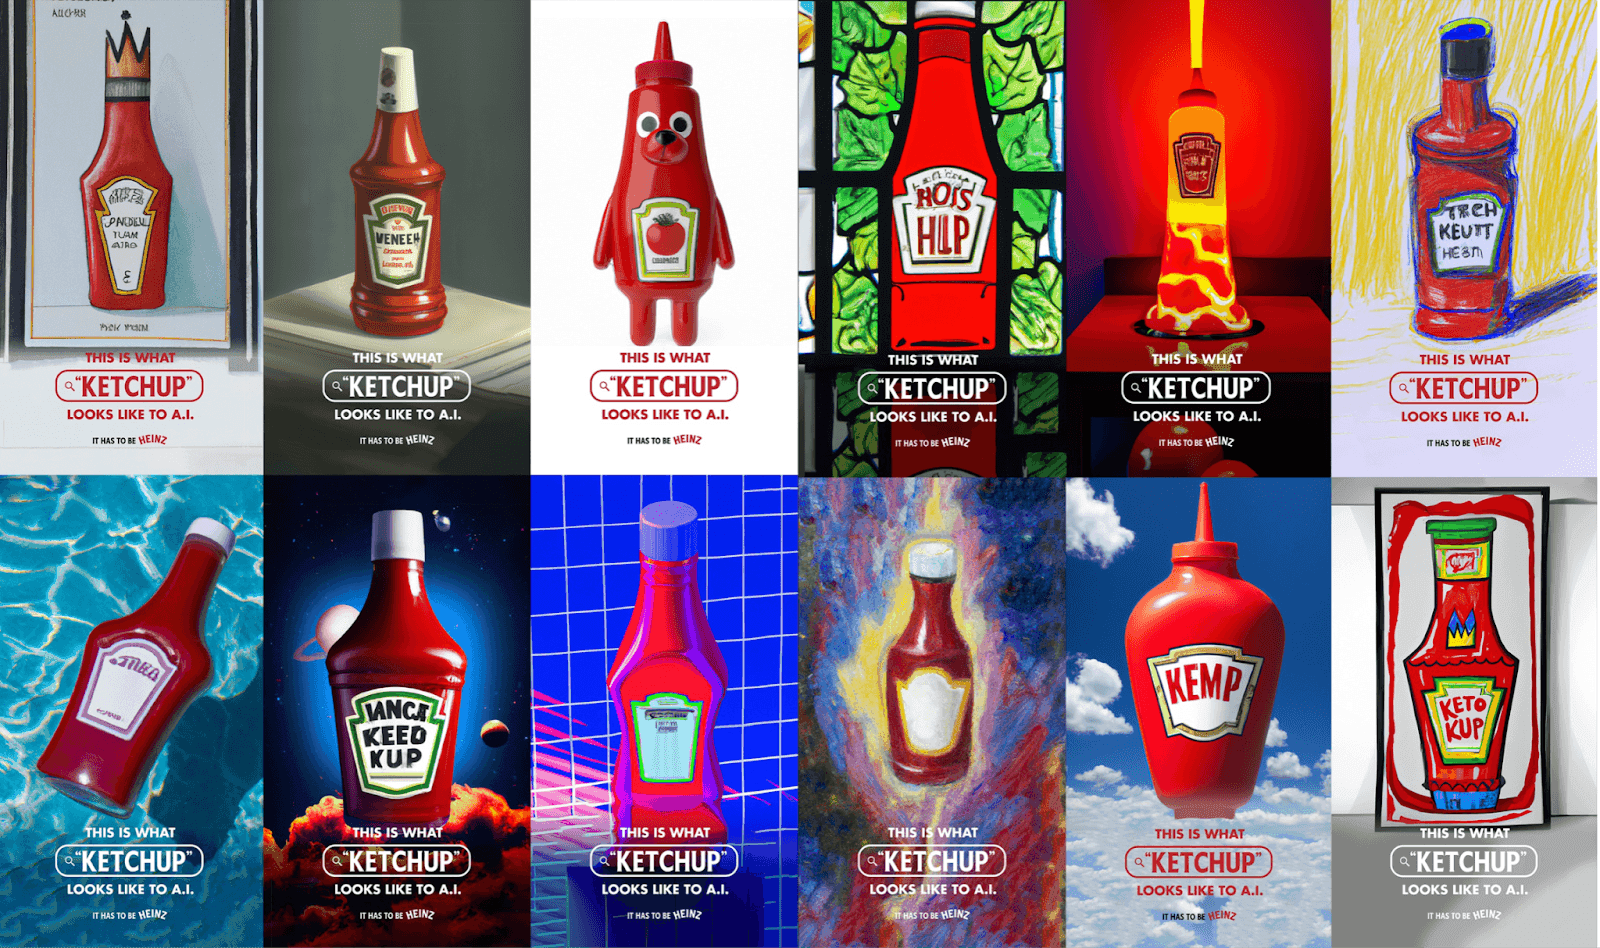 AI generated images of ketchup, resembling Heinz ketchup